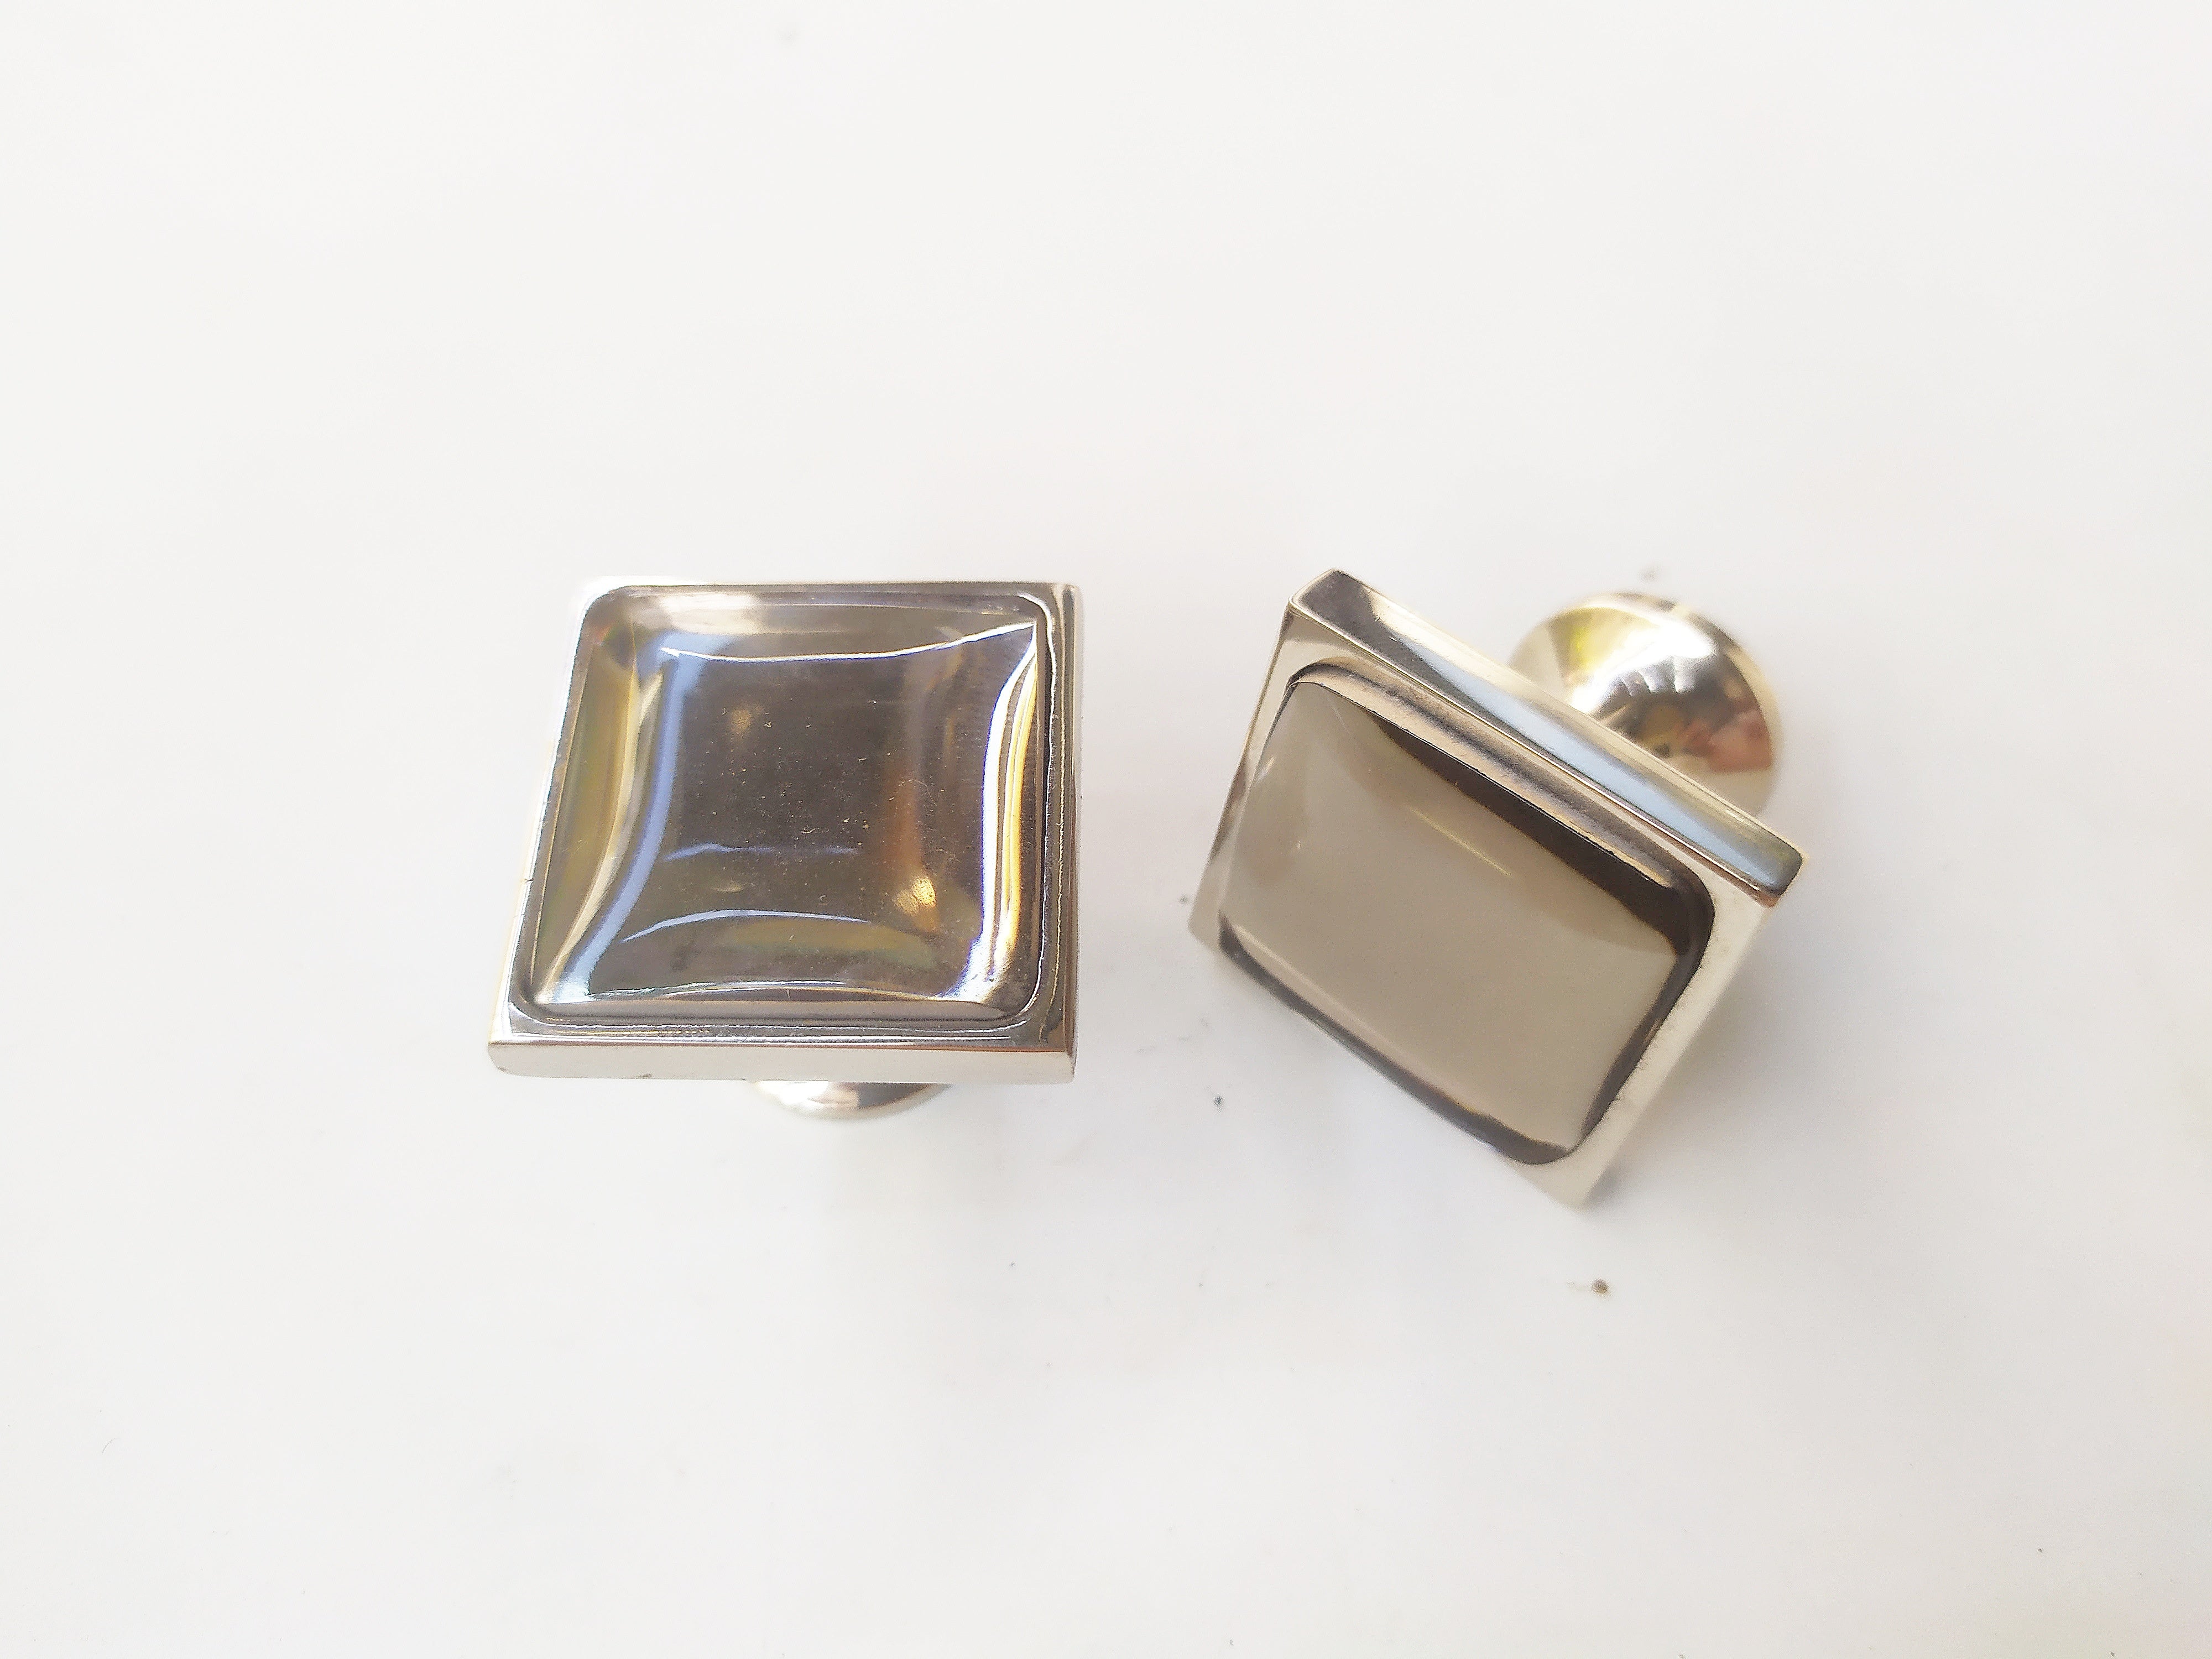 Inlaid square brown knob in brass plated with nickel